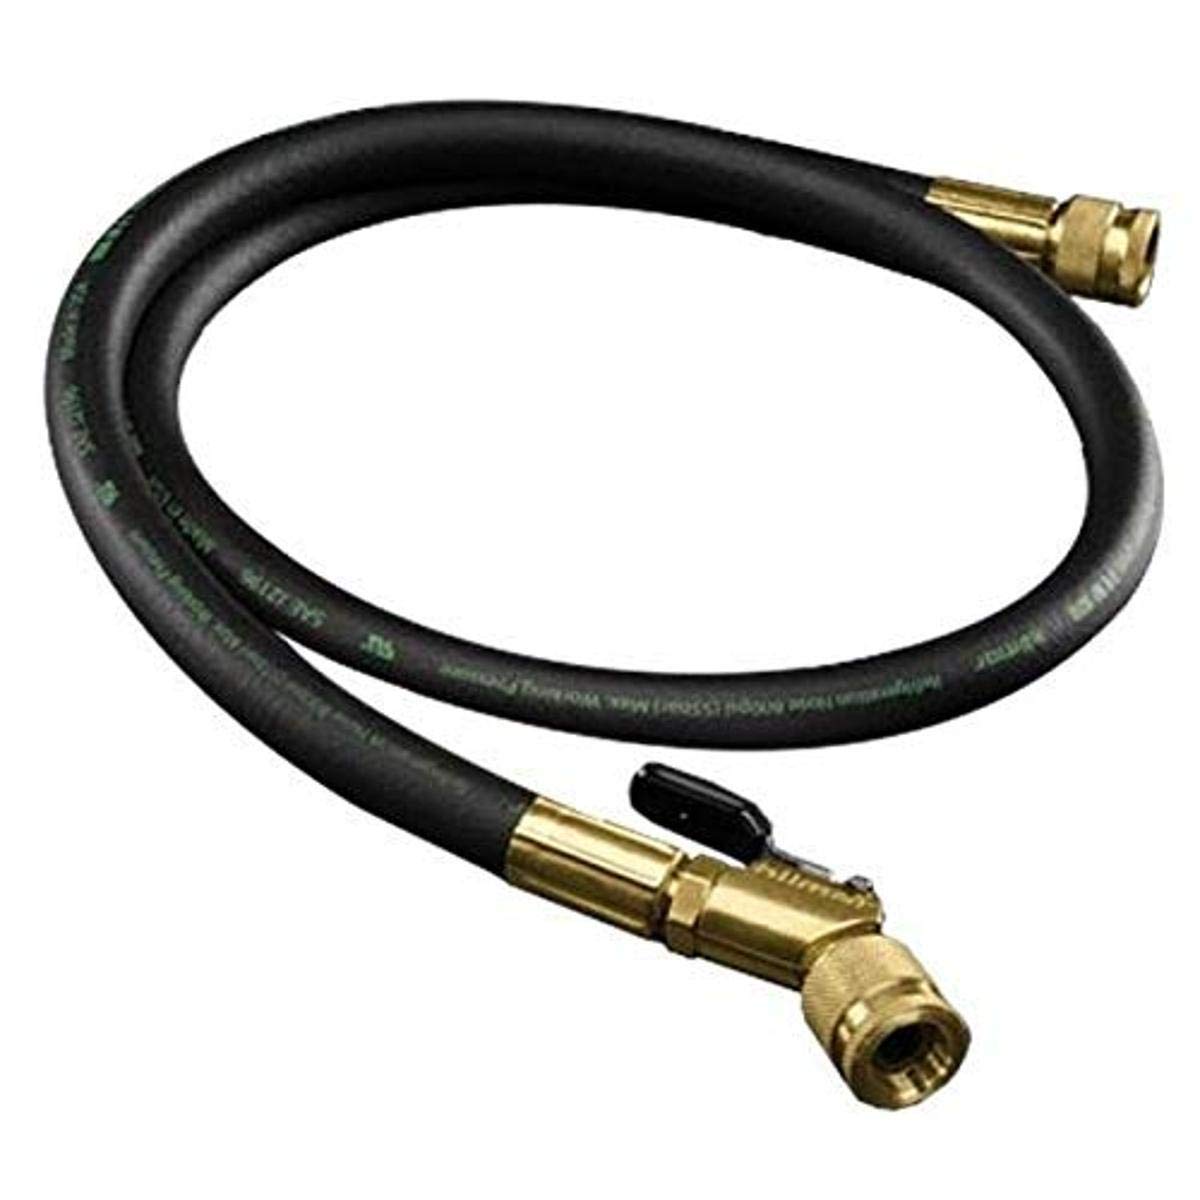 Hilmor 60" Hose with Ball Valve End Rated for 800 PSI, 3/8" Vacuum